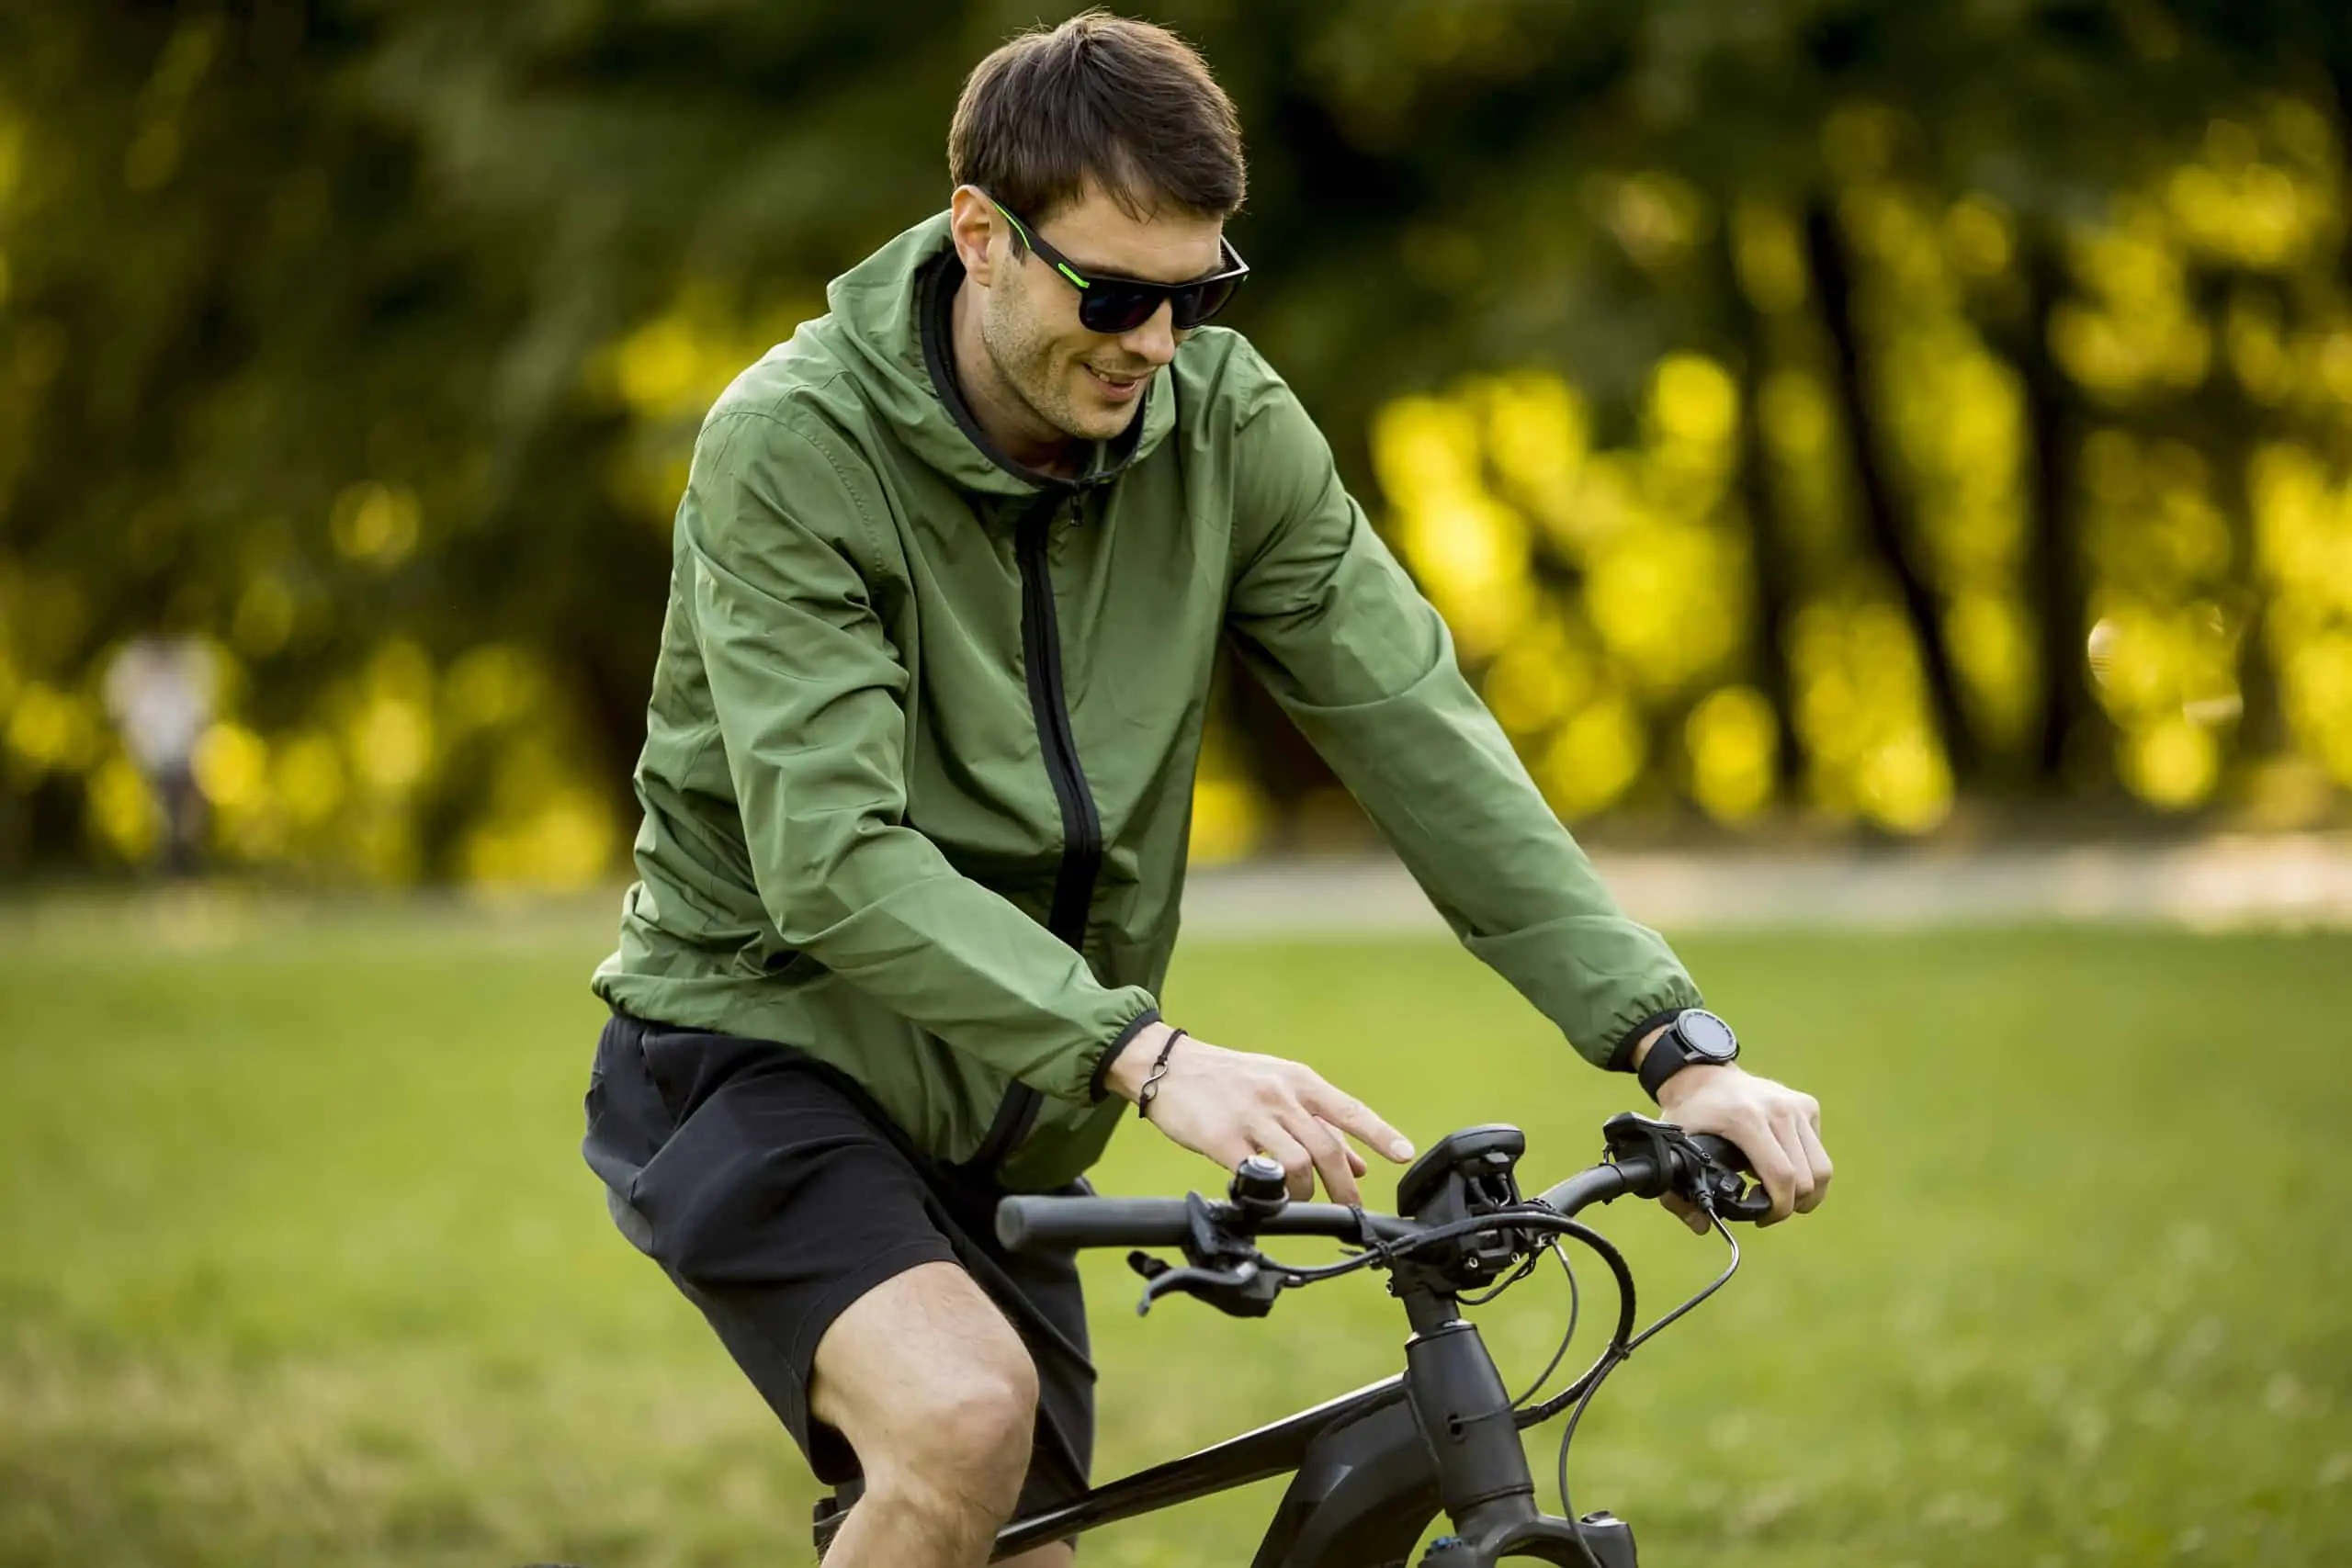 How to Improve Your E-Bike Riding Skills and Techniques? The Ultimate Guide